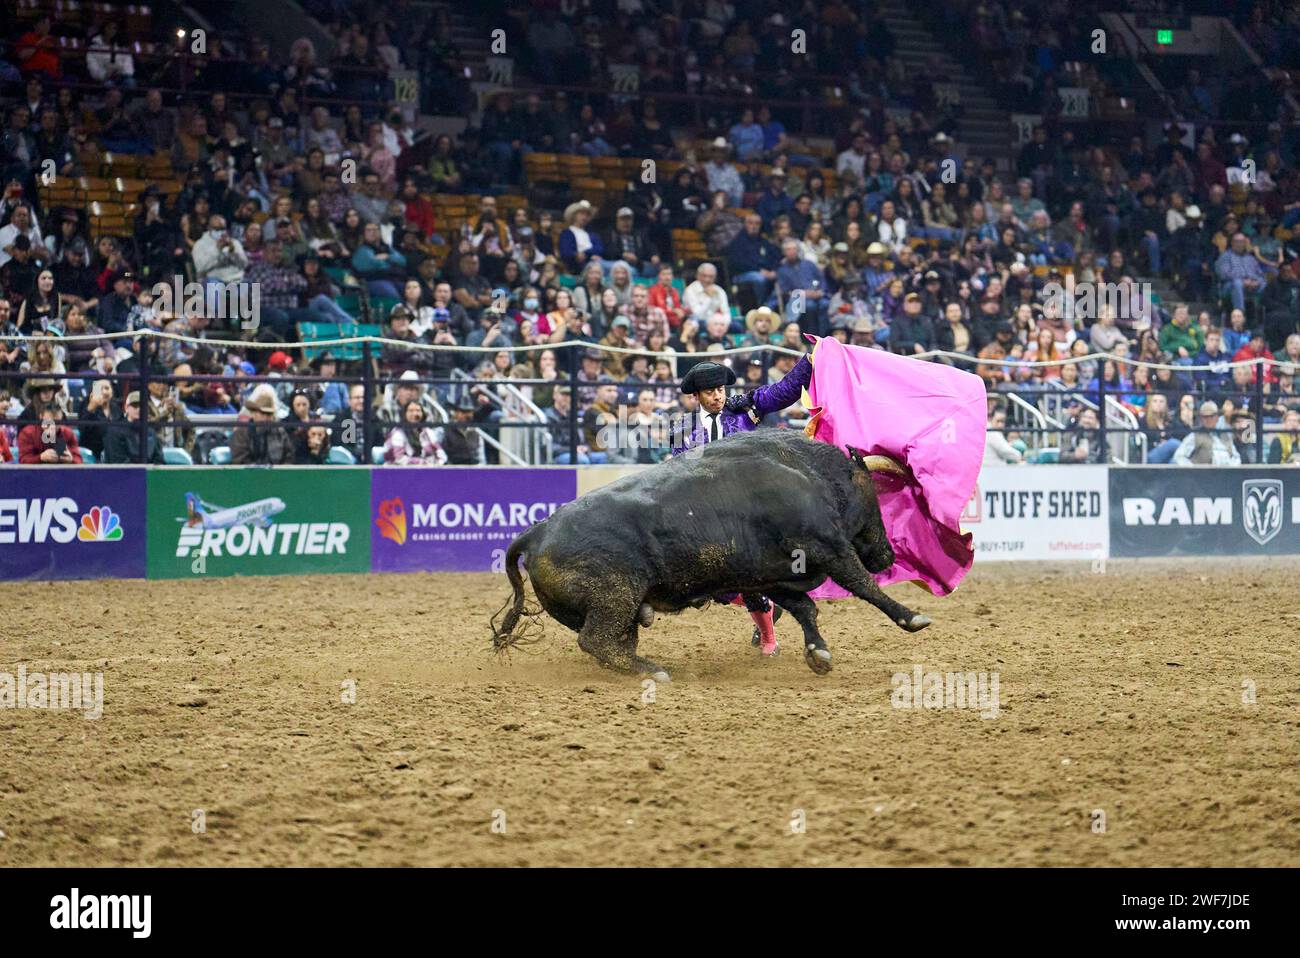 Matador with bull in bullfighting event at rodeo Stock Photo